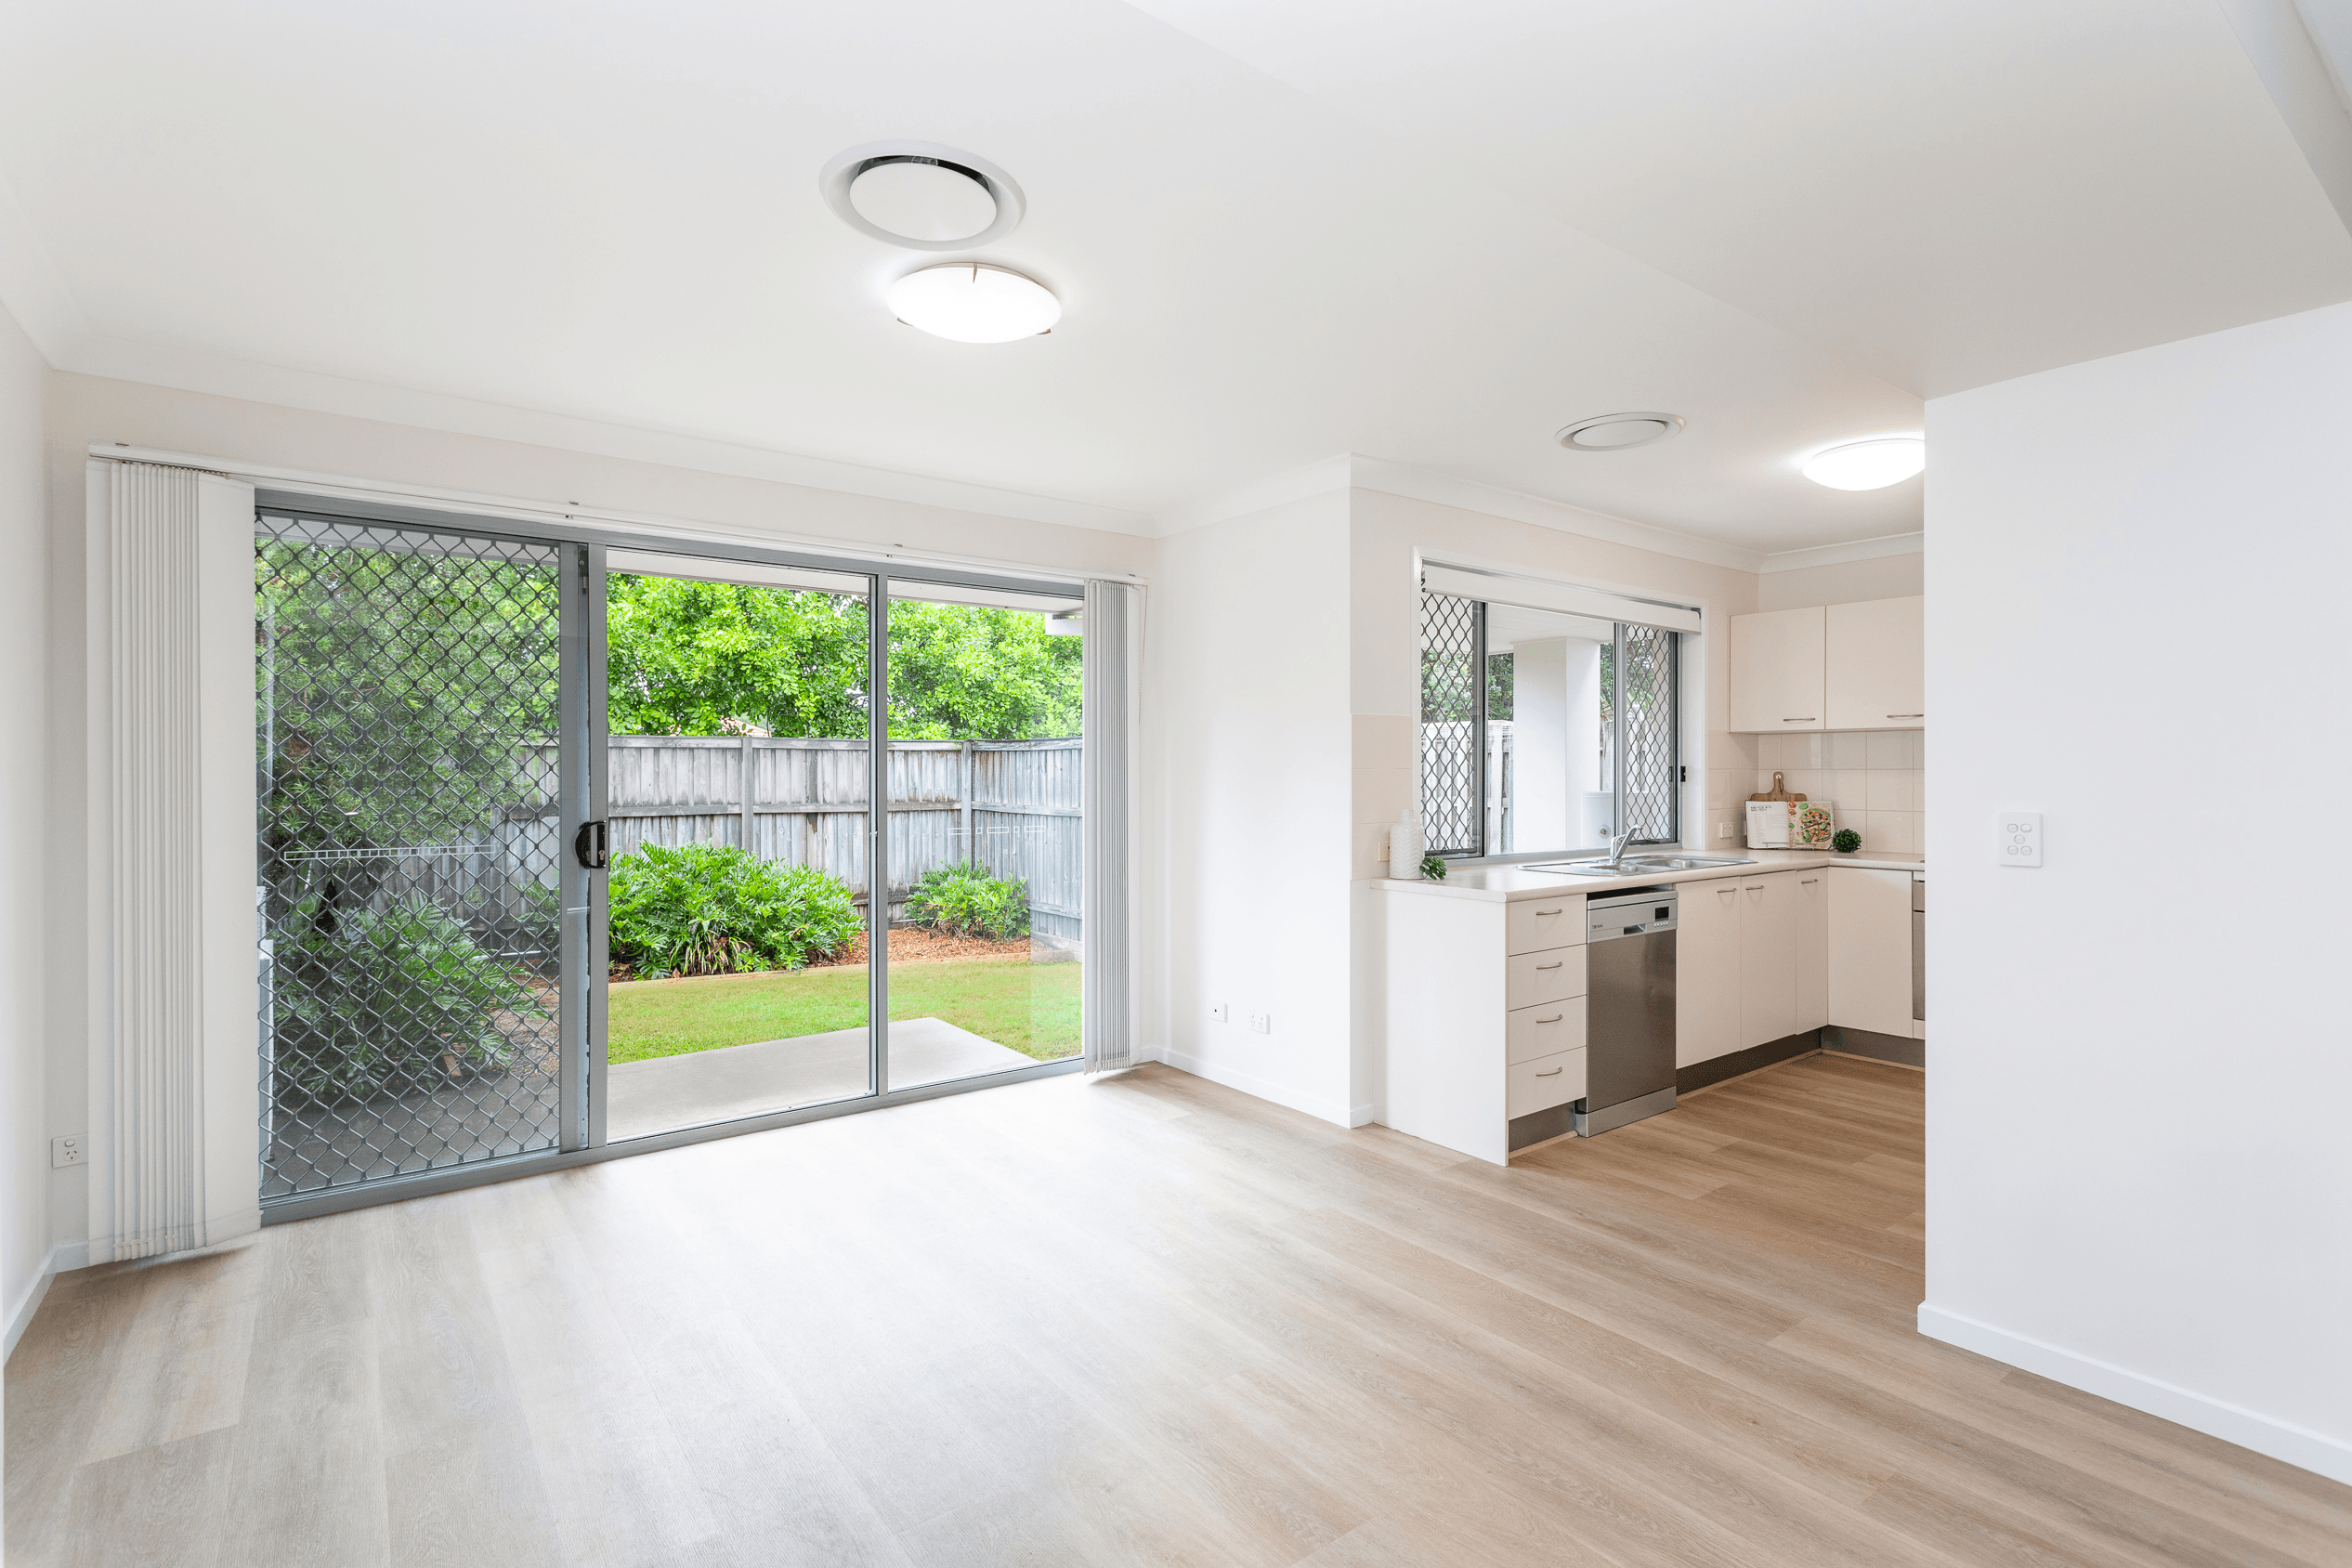 13/110 Lexey Crescent, WAKERLEY, QLD 4154